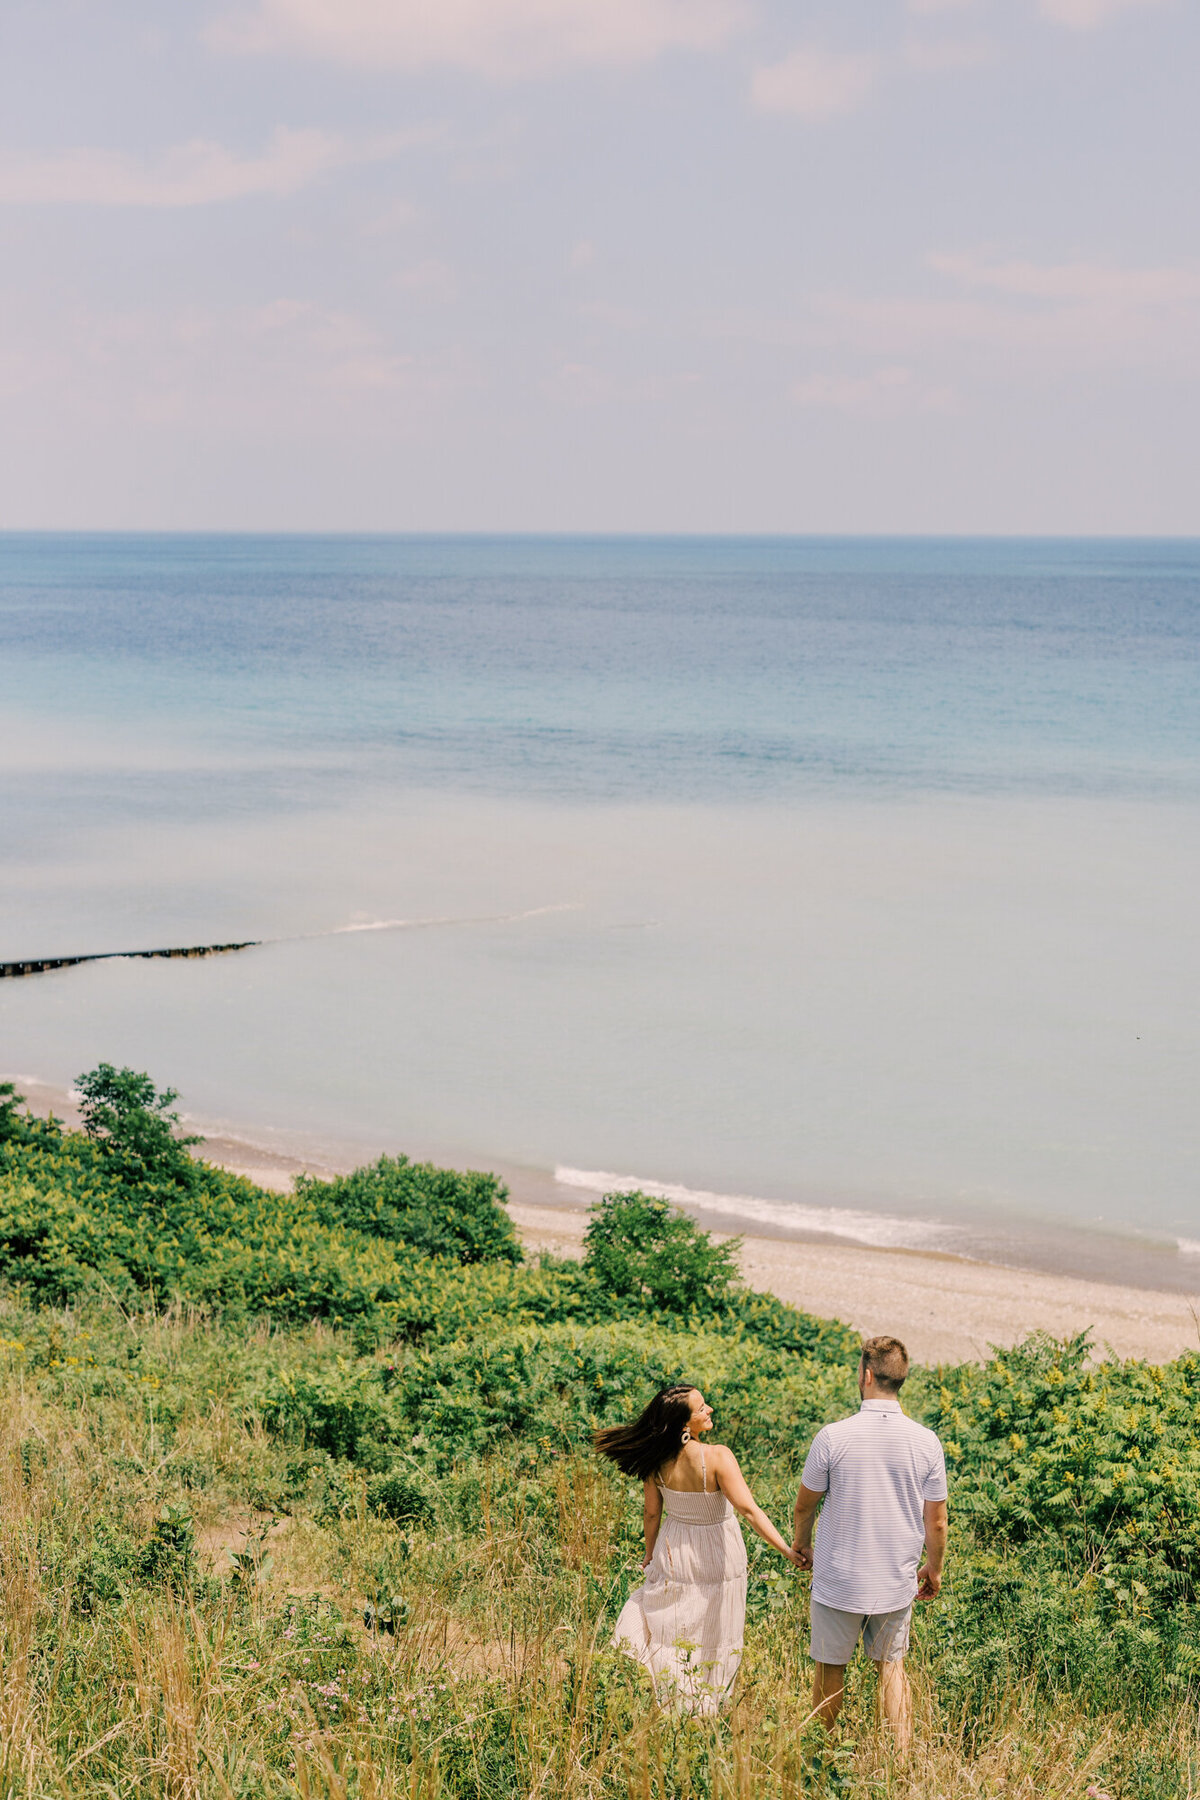 A summery engagement photo along Chicago's beautiful North Shore